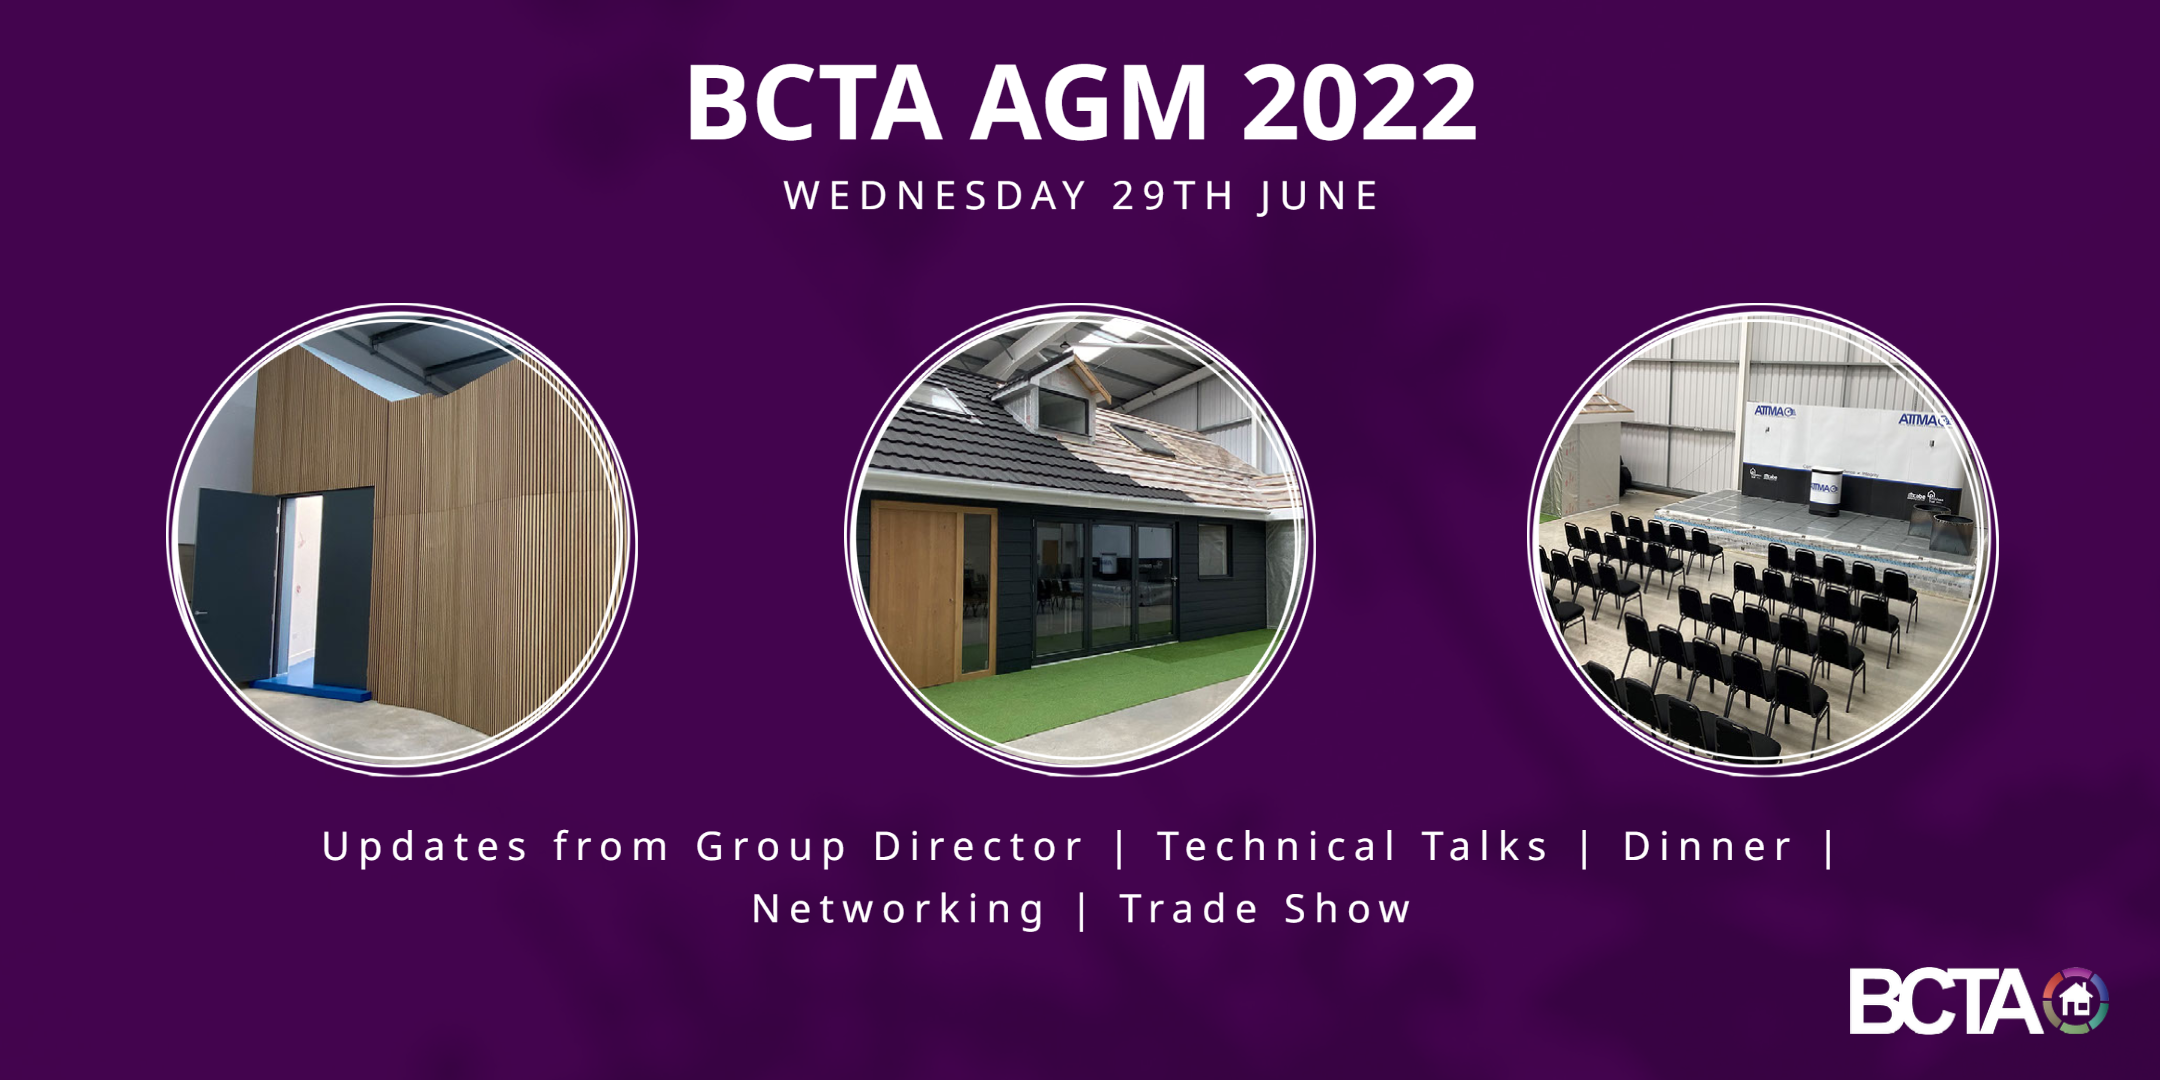 The BCTA AGM has arrived!